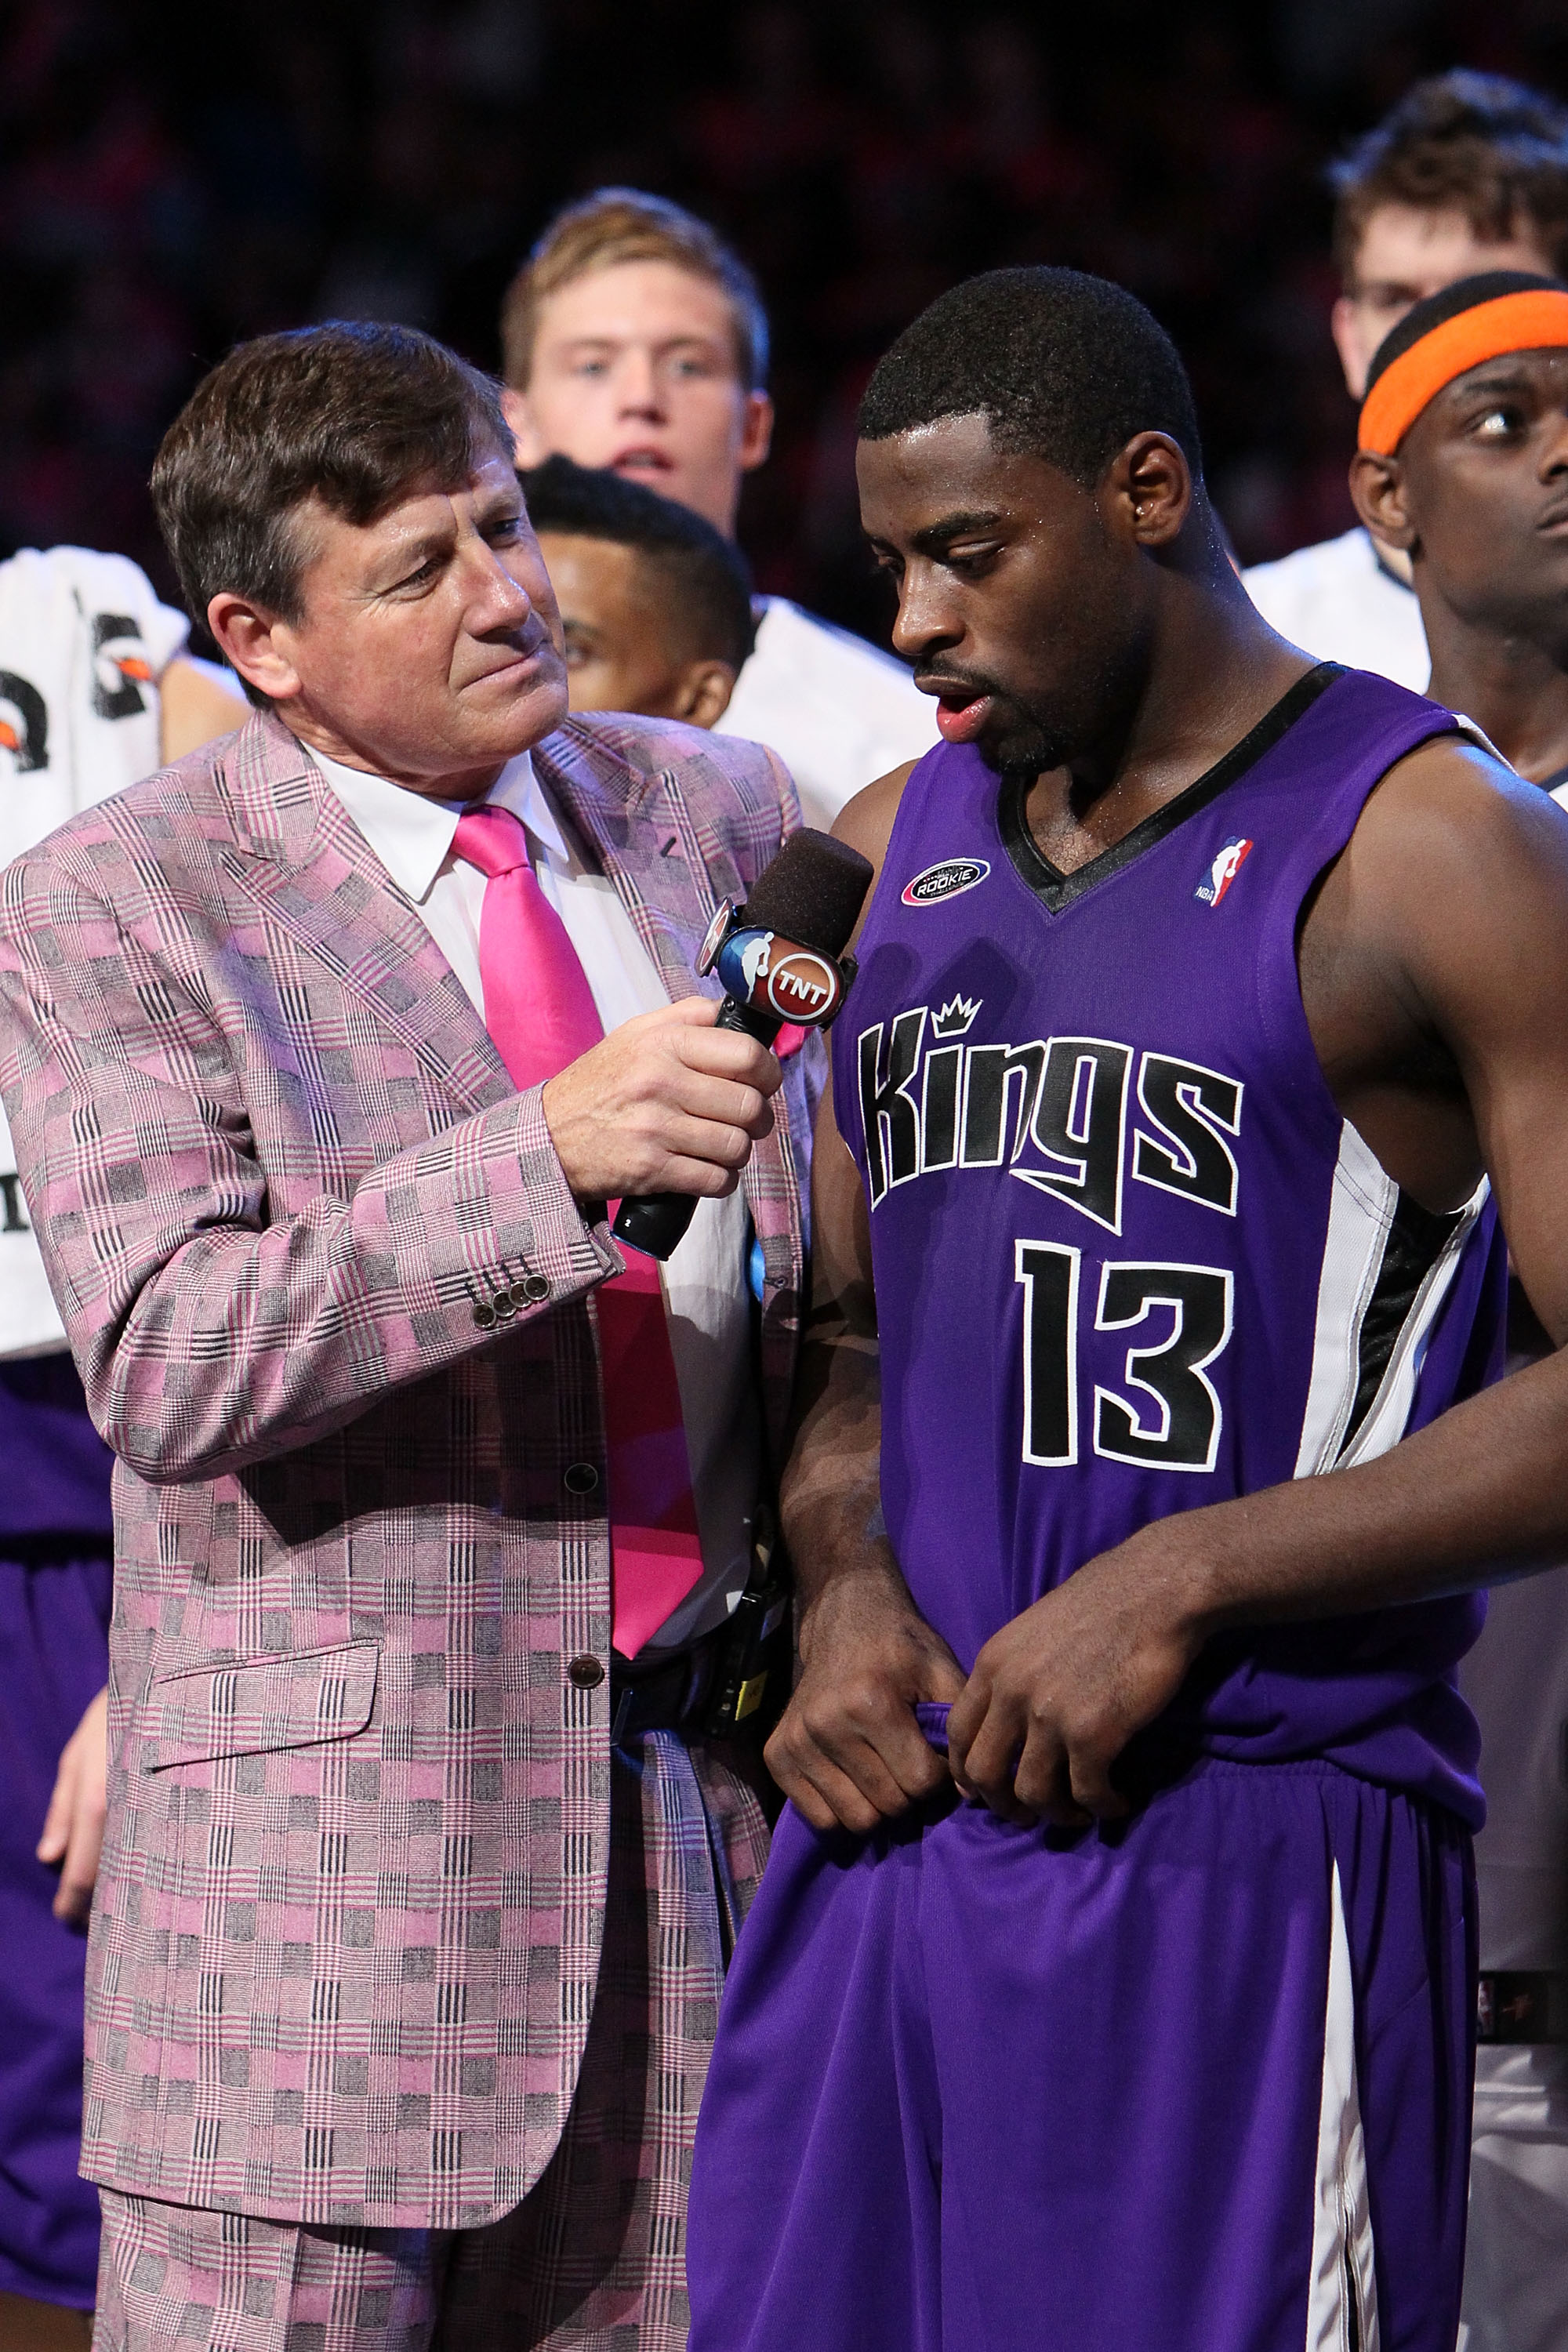 DALLAS - FEBRUARY 12:  Sportscaster Craig Sager interviews Tyreke Evans #13 of the Rookie team  in honor of his MVP award after the T-Mobile Rookie Challenge & Youth Jam part of 2010 NBA All-Star Weekend at American Airlines Center on February 12, 2010 in